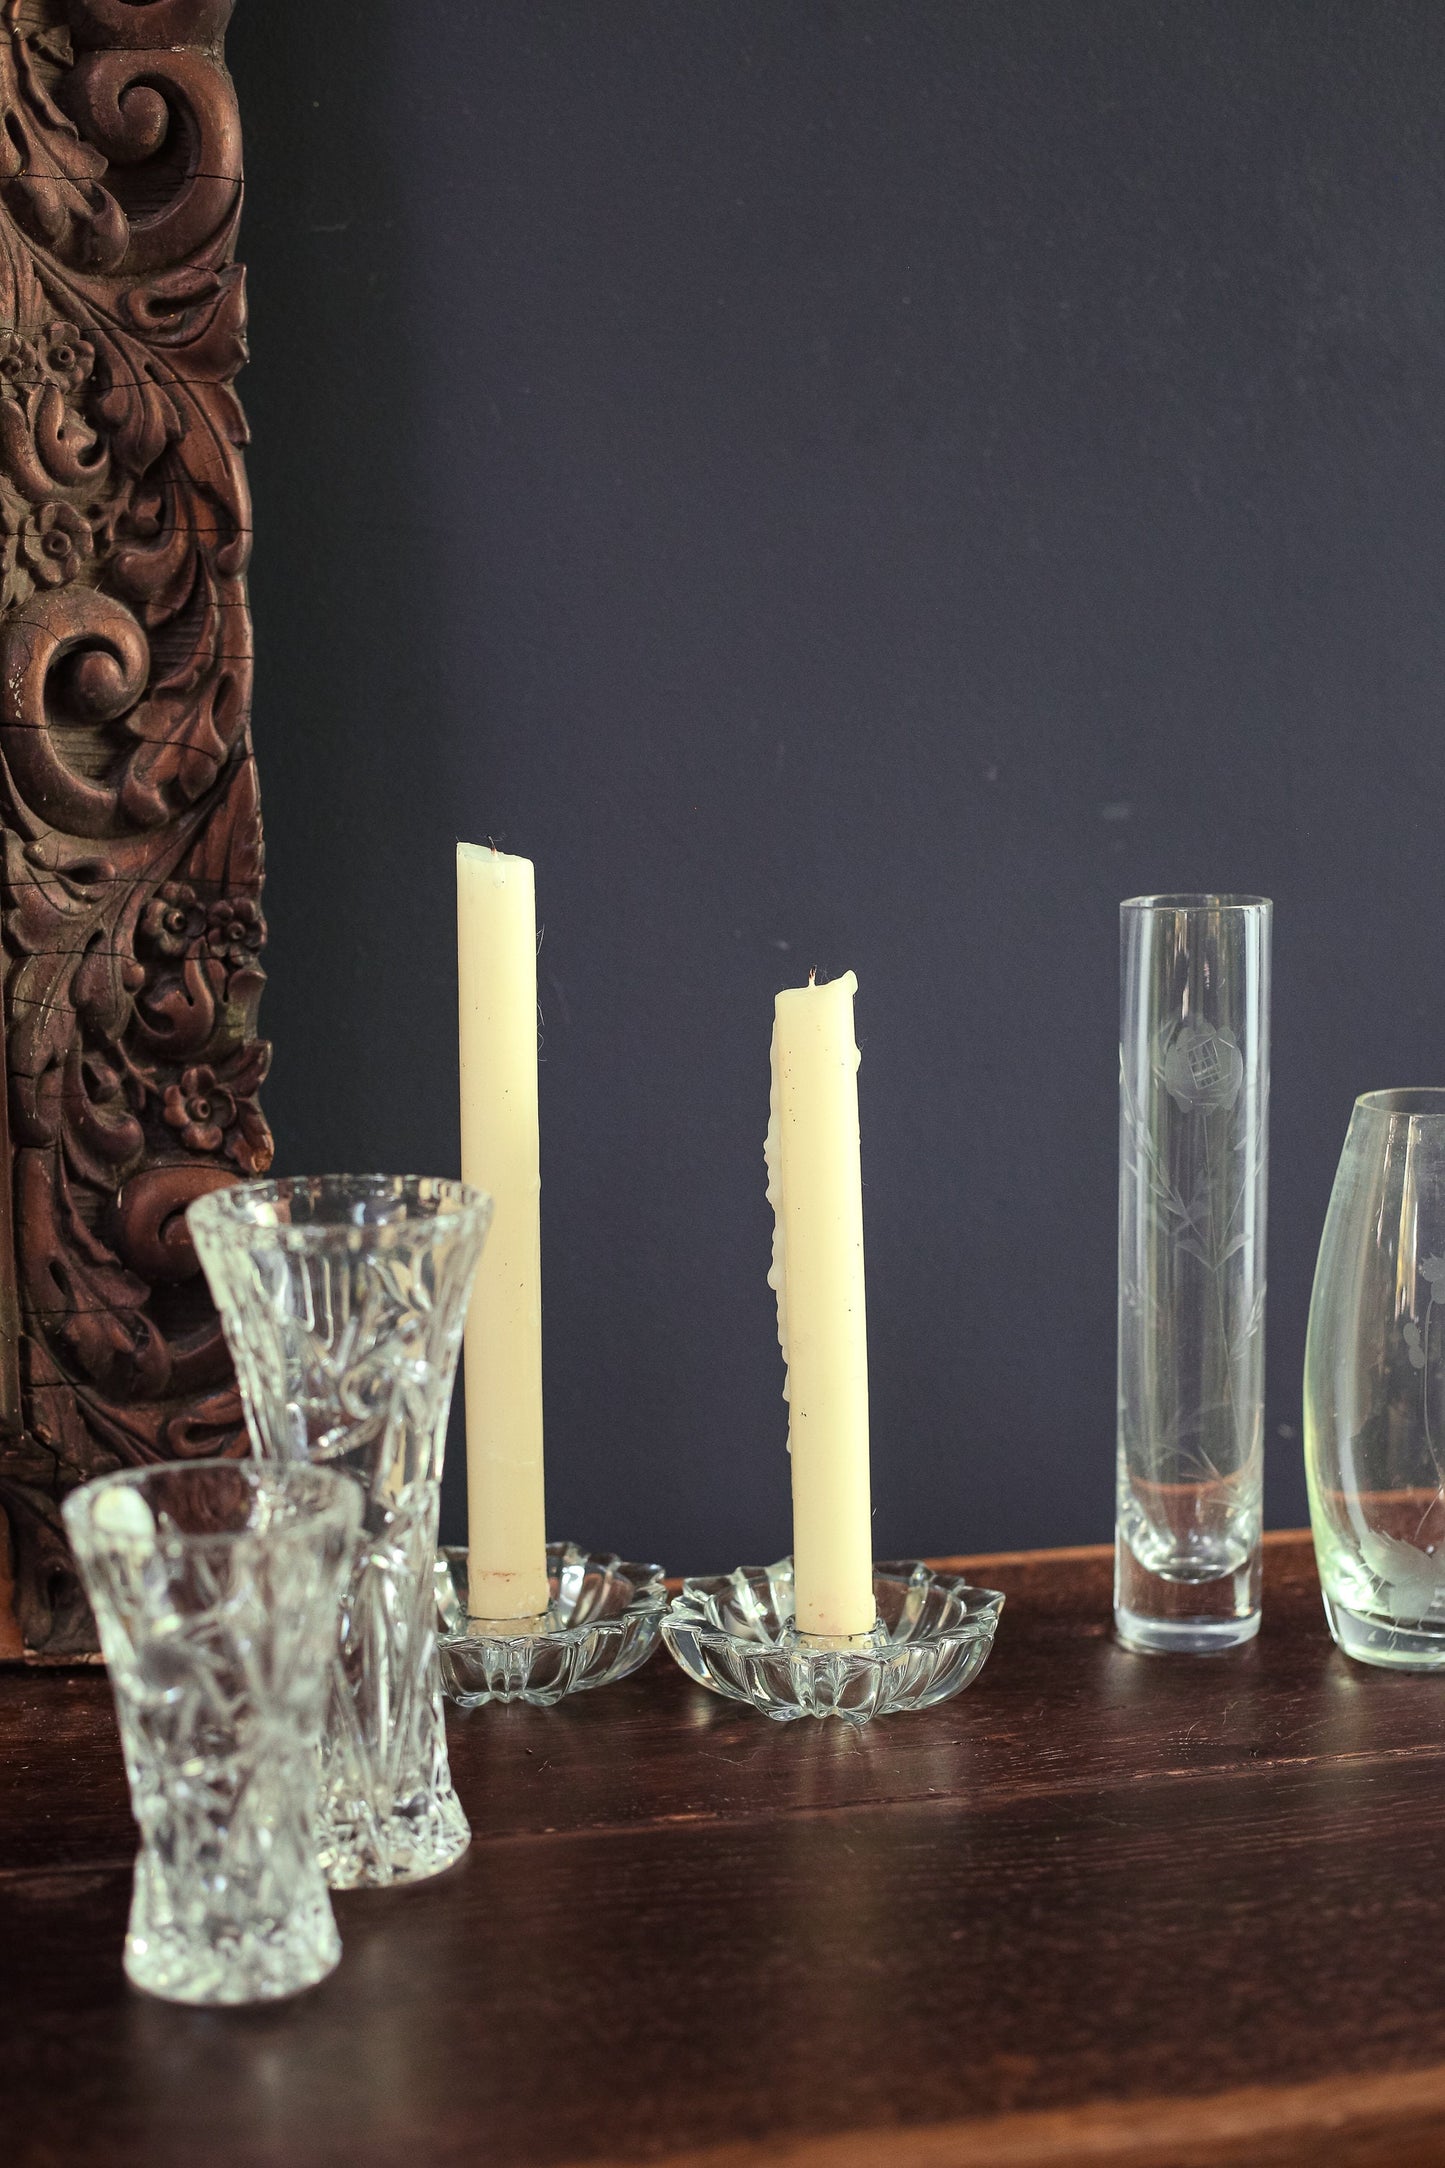 Pair of Crystal Starburst Candle Bases - Low Star Shaped Crystal Taper Candle Holder